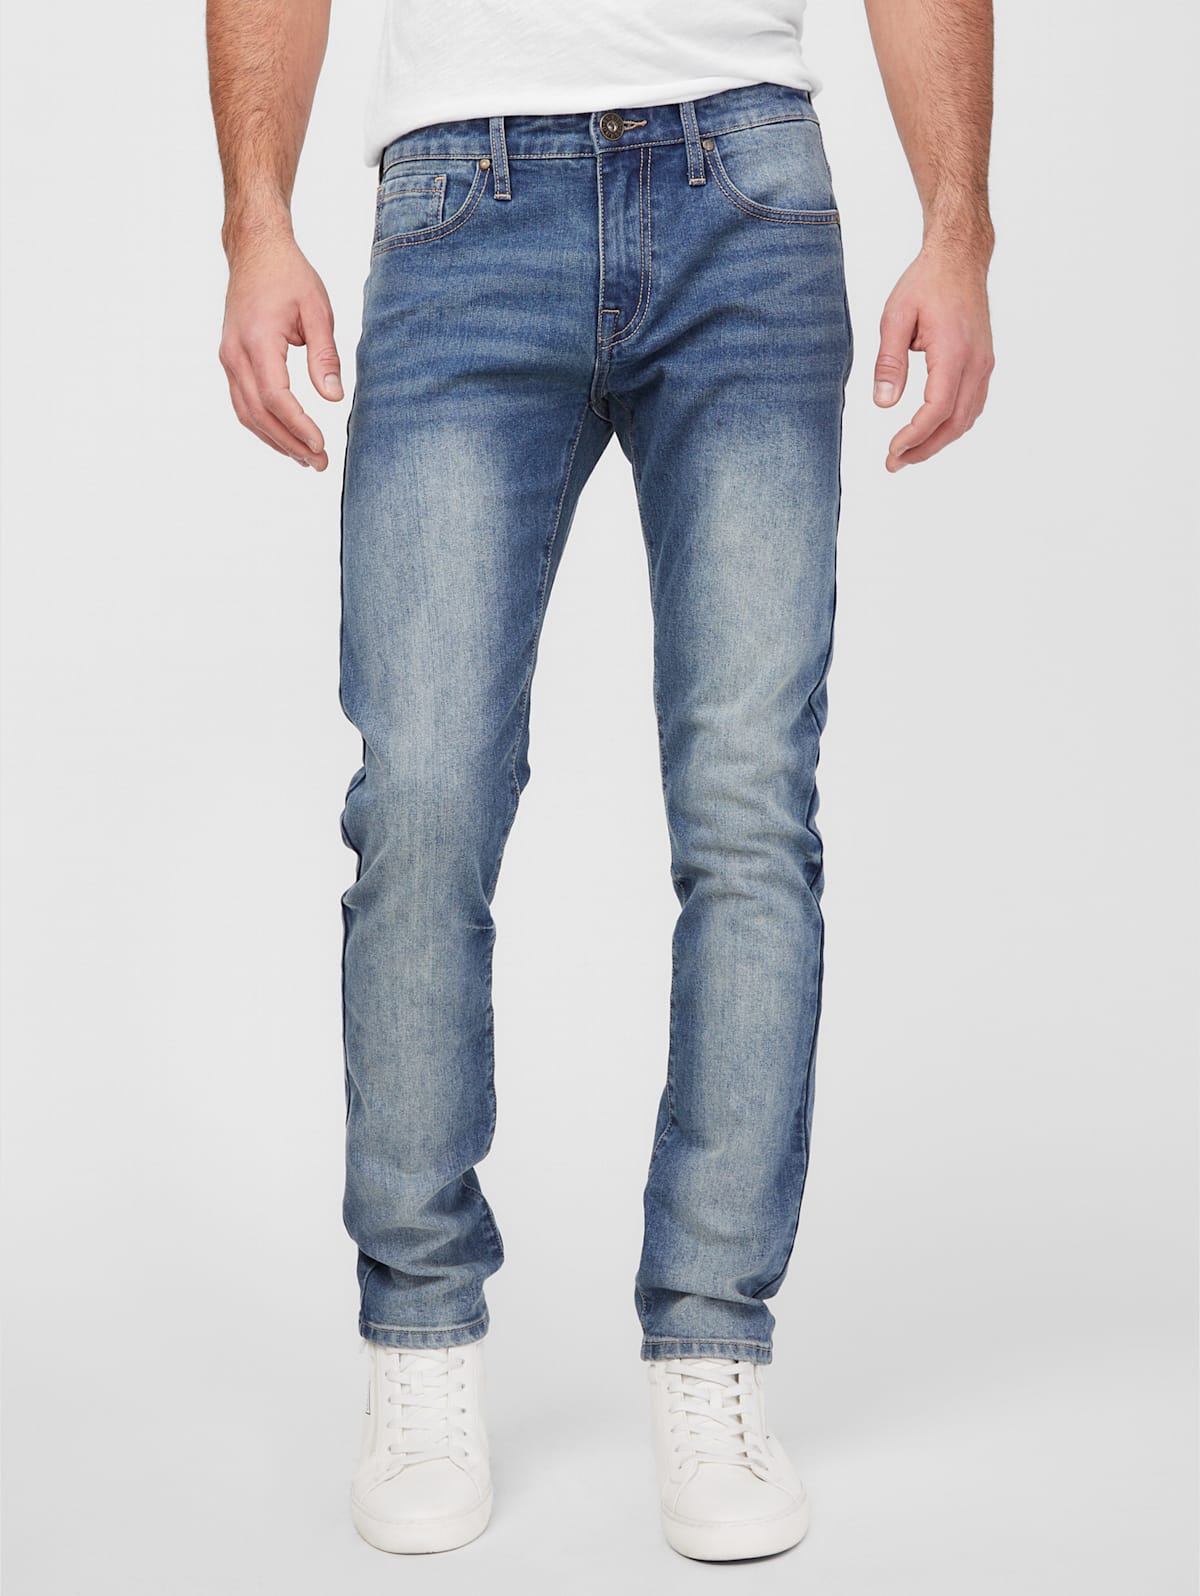 G by GUESS Mens Scotch Skinny Jeans 